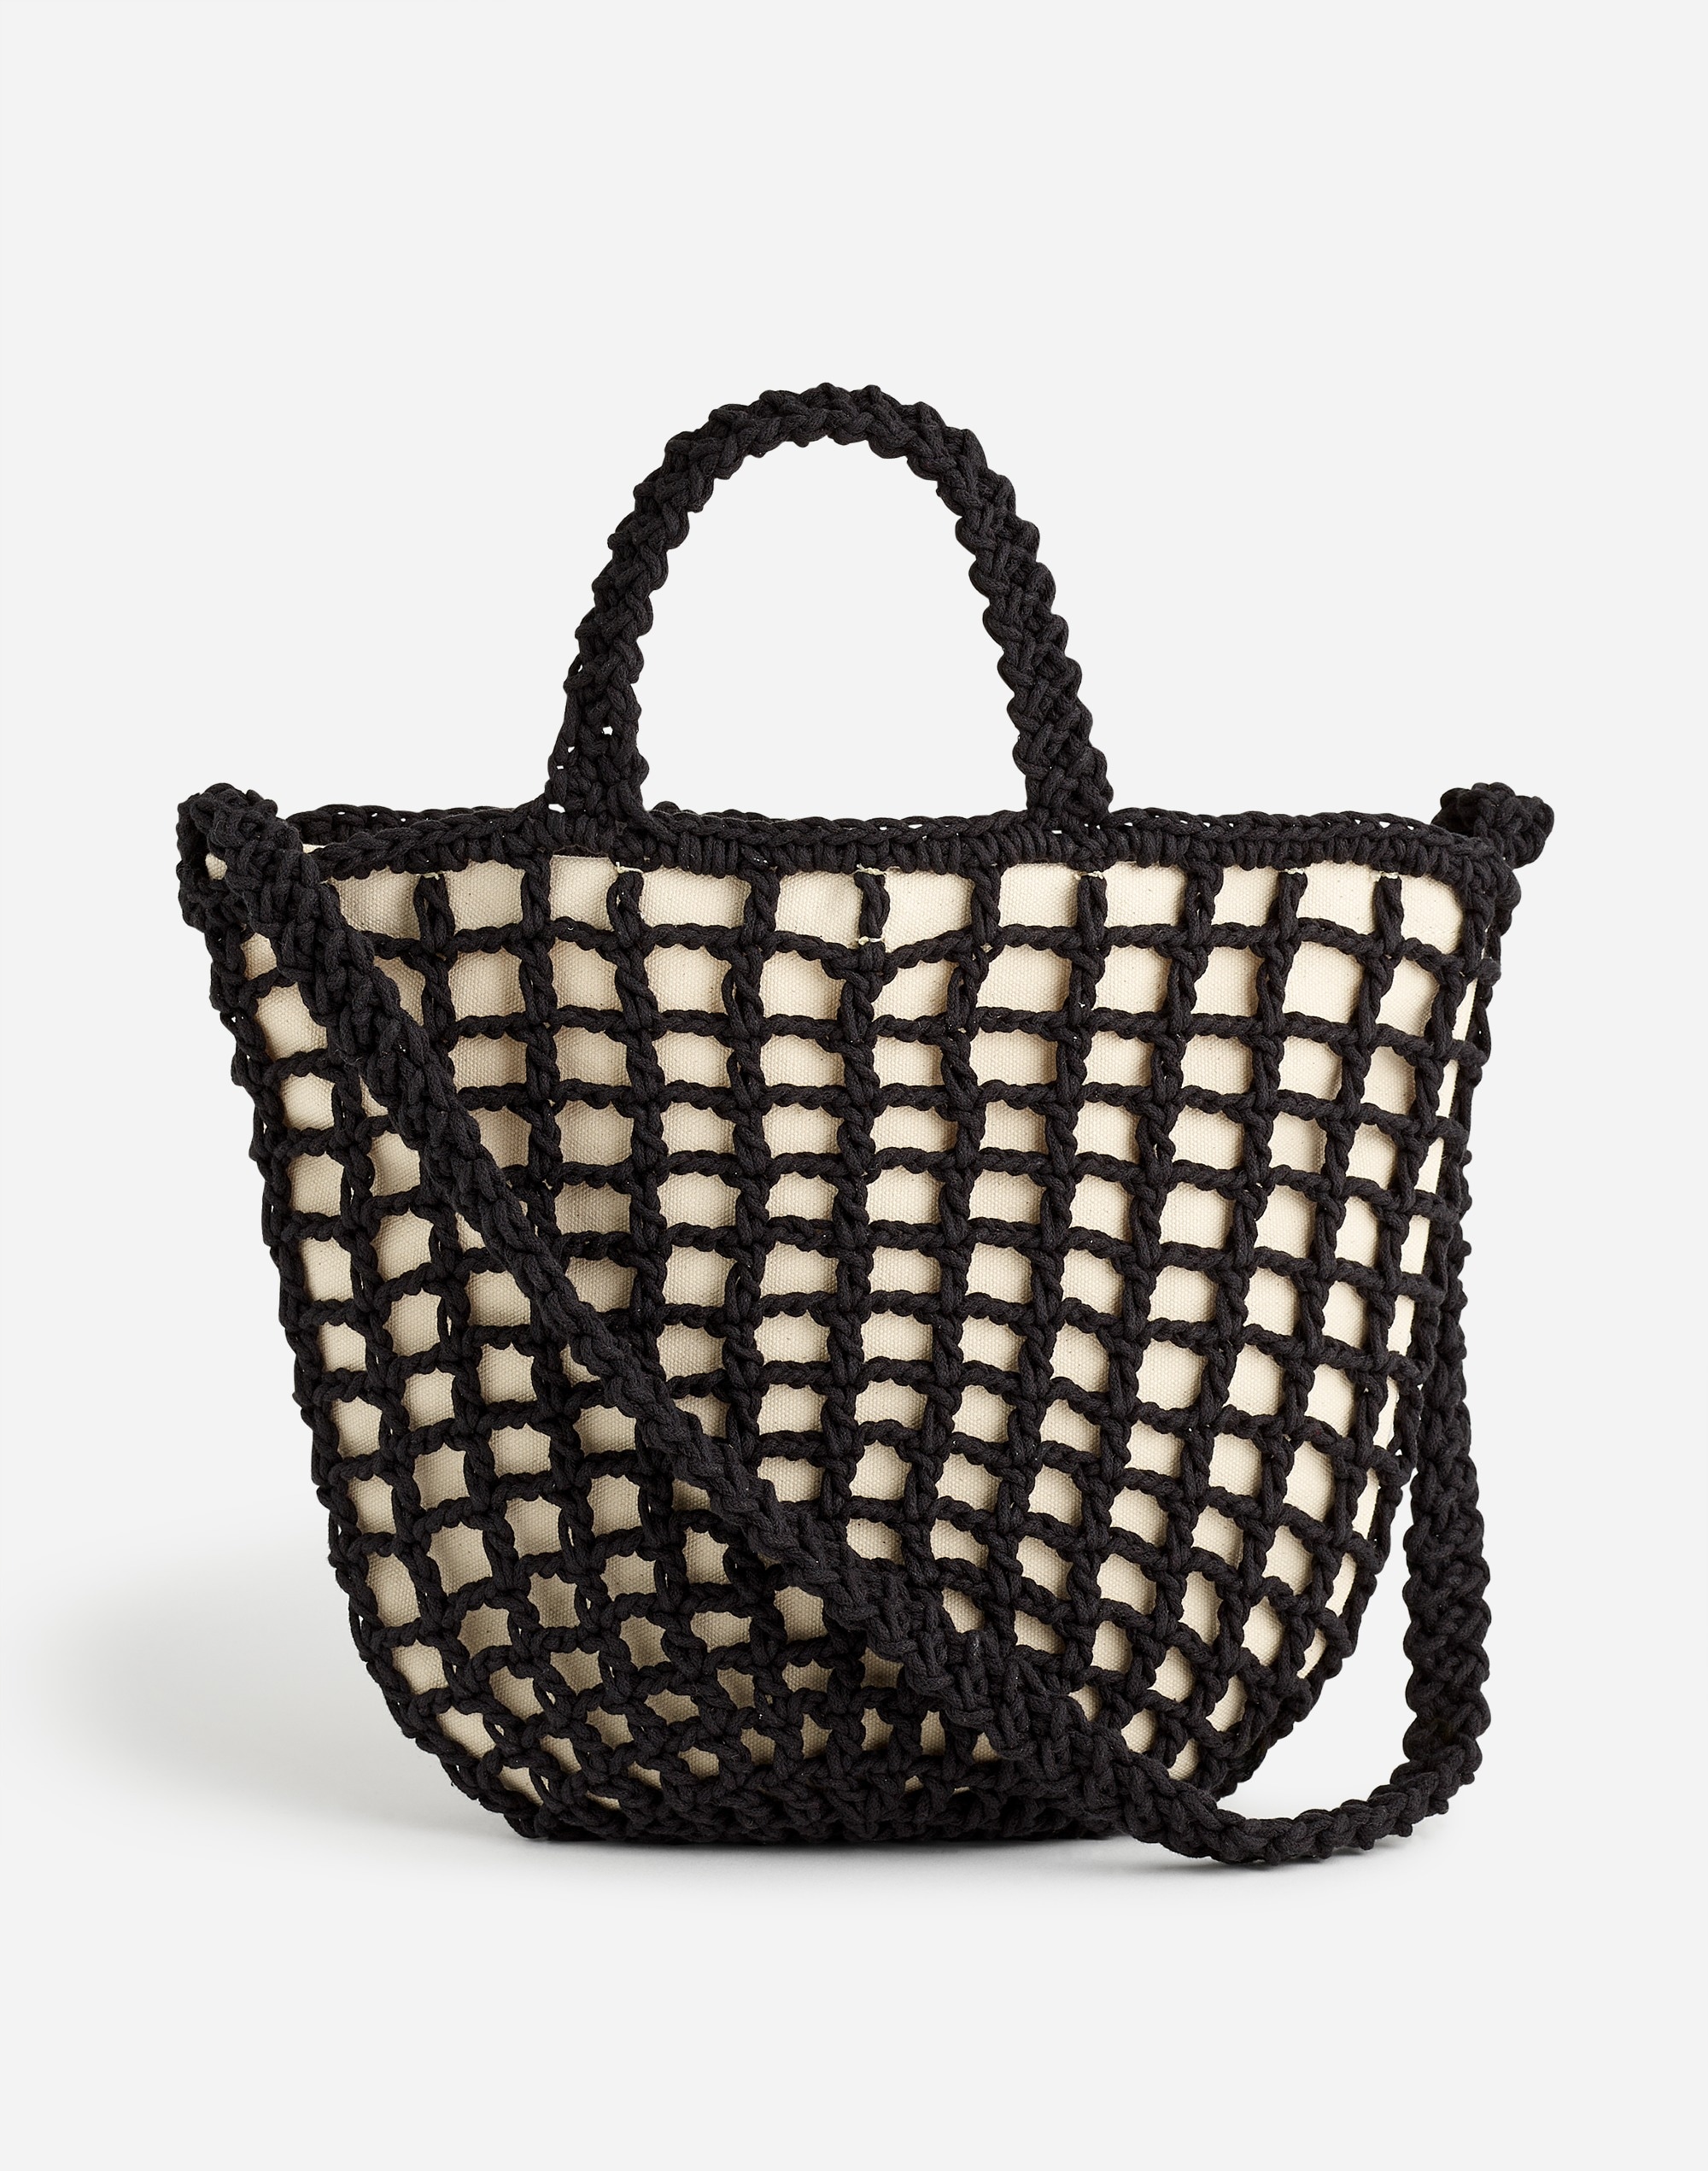 The Crocheted Shoulder Bag | Madewell